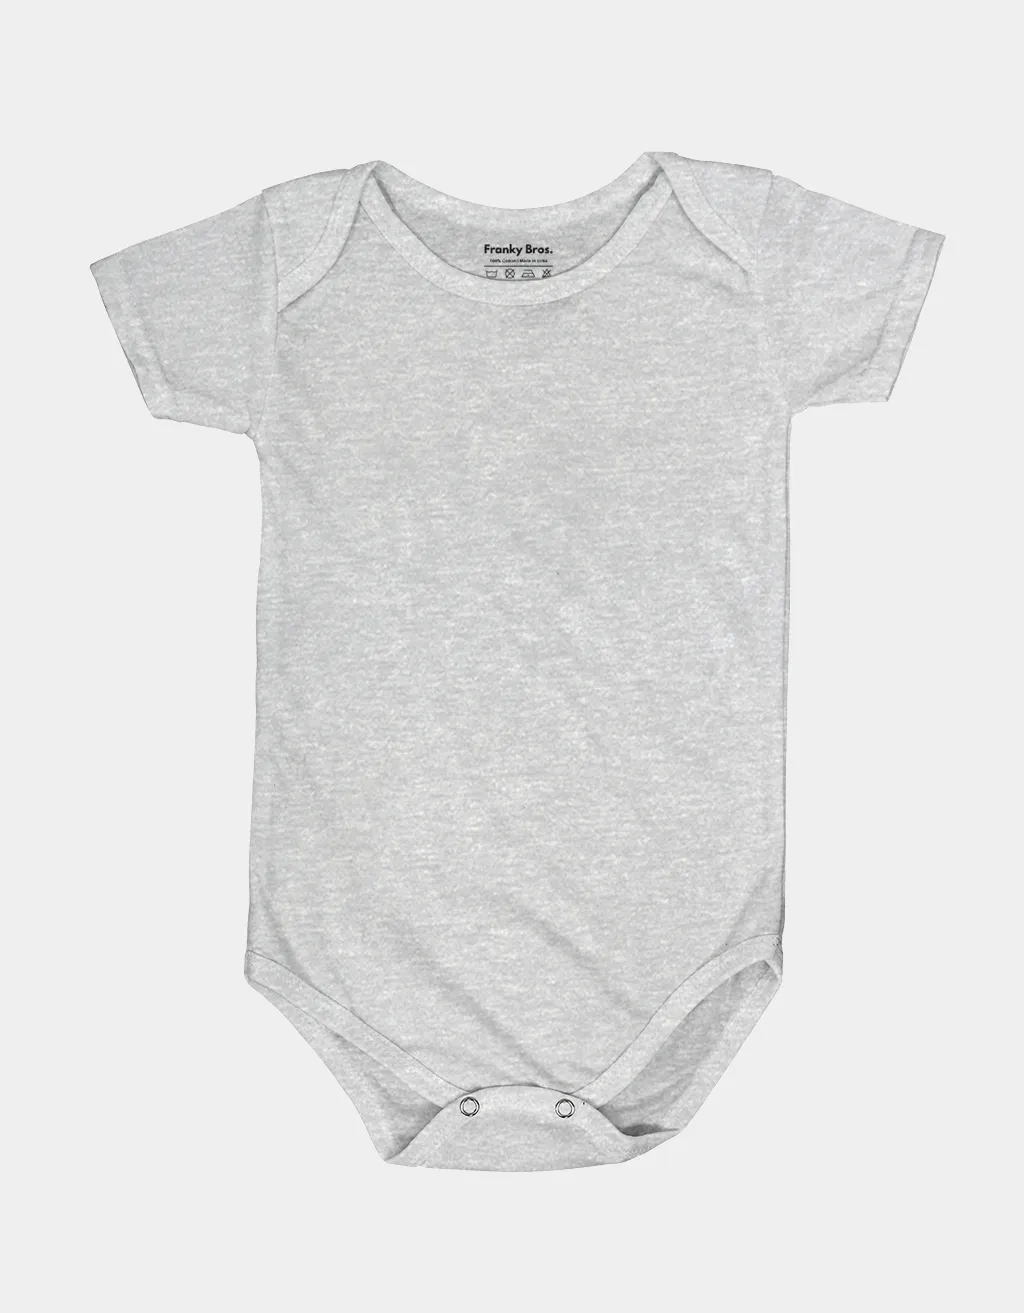 grey plain baby onesies for newborn baby clothes online india